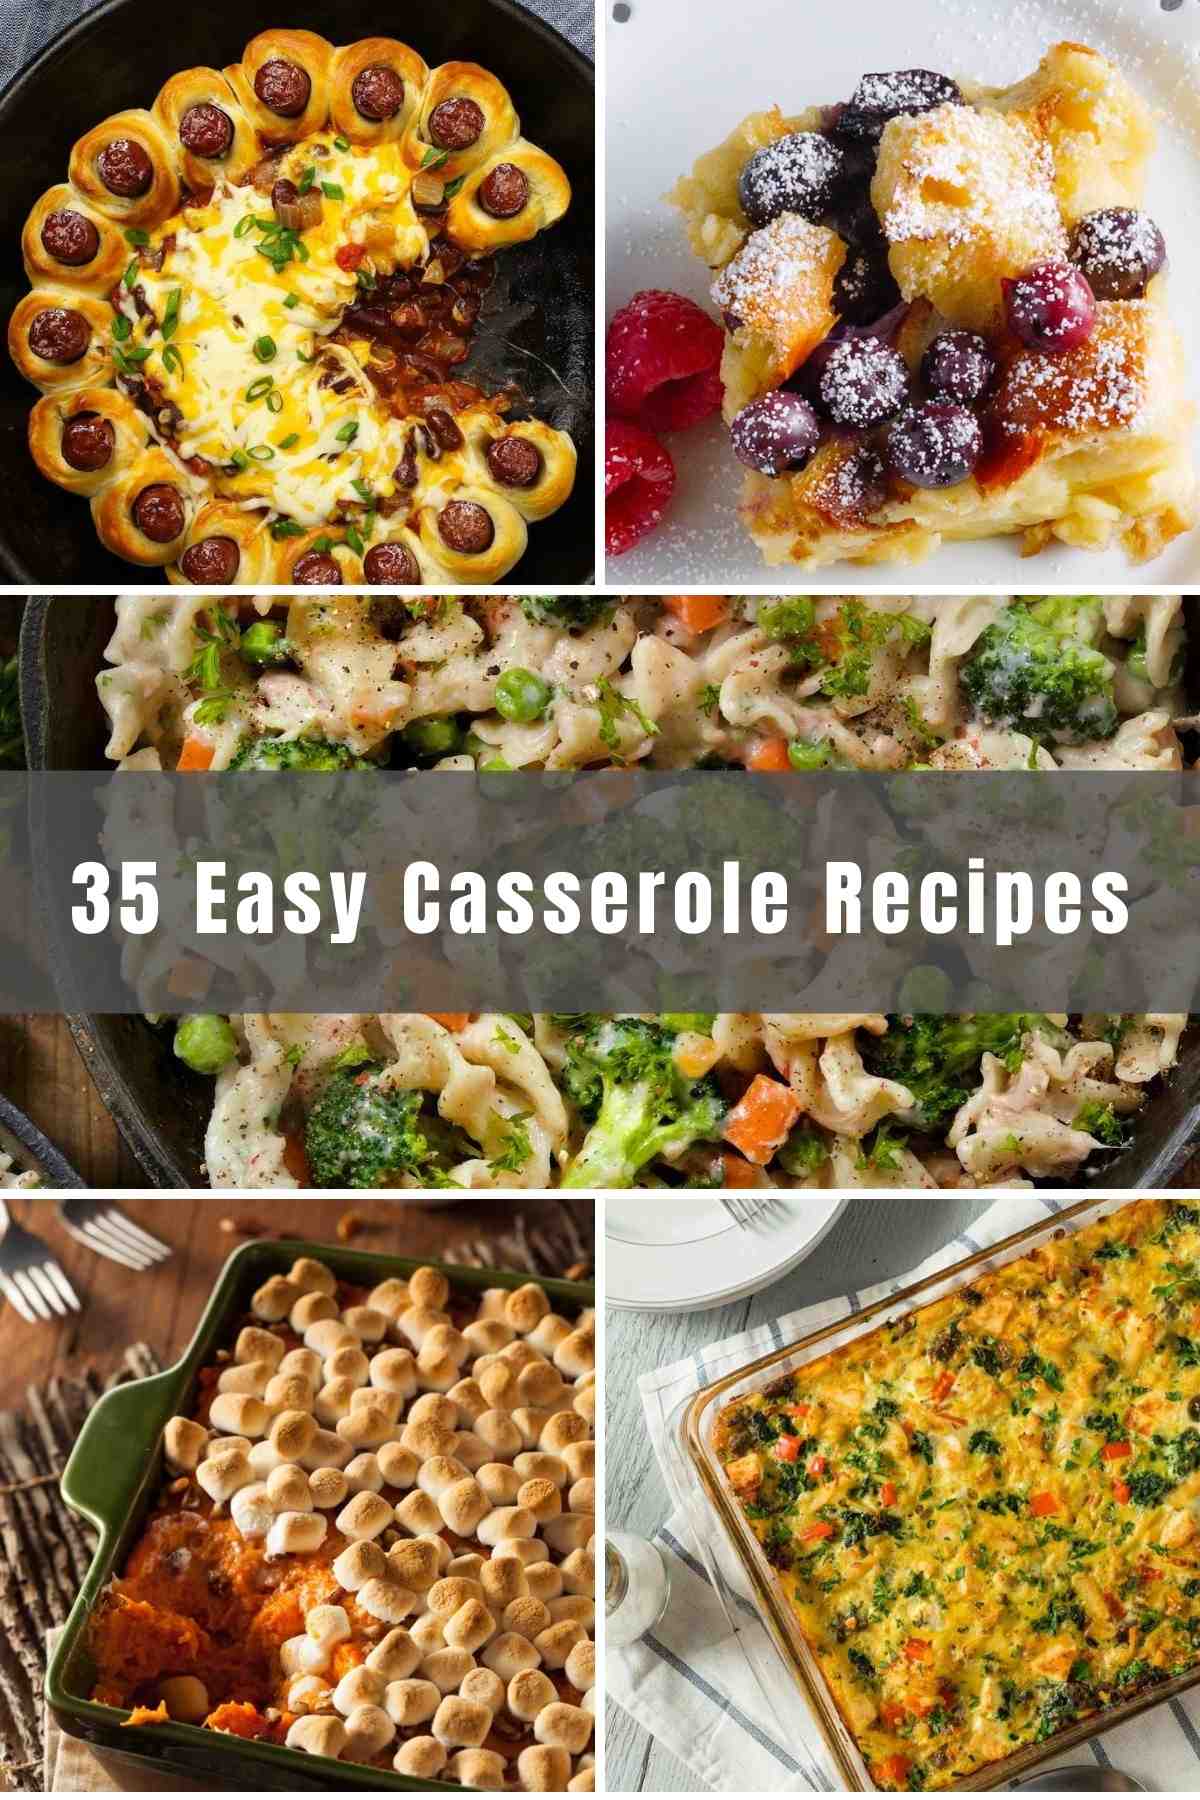 Whether you're looking to make your busy weeknights easier or serve a large crowd, we've got you covered with 35 of the Best Casserole Recipes below. Find top-rated comforting casseroles for breakfast and dinner with chicken, vegetables, and more.